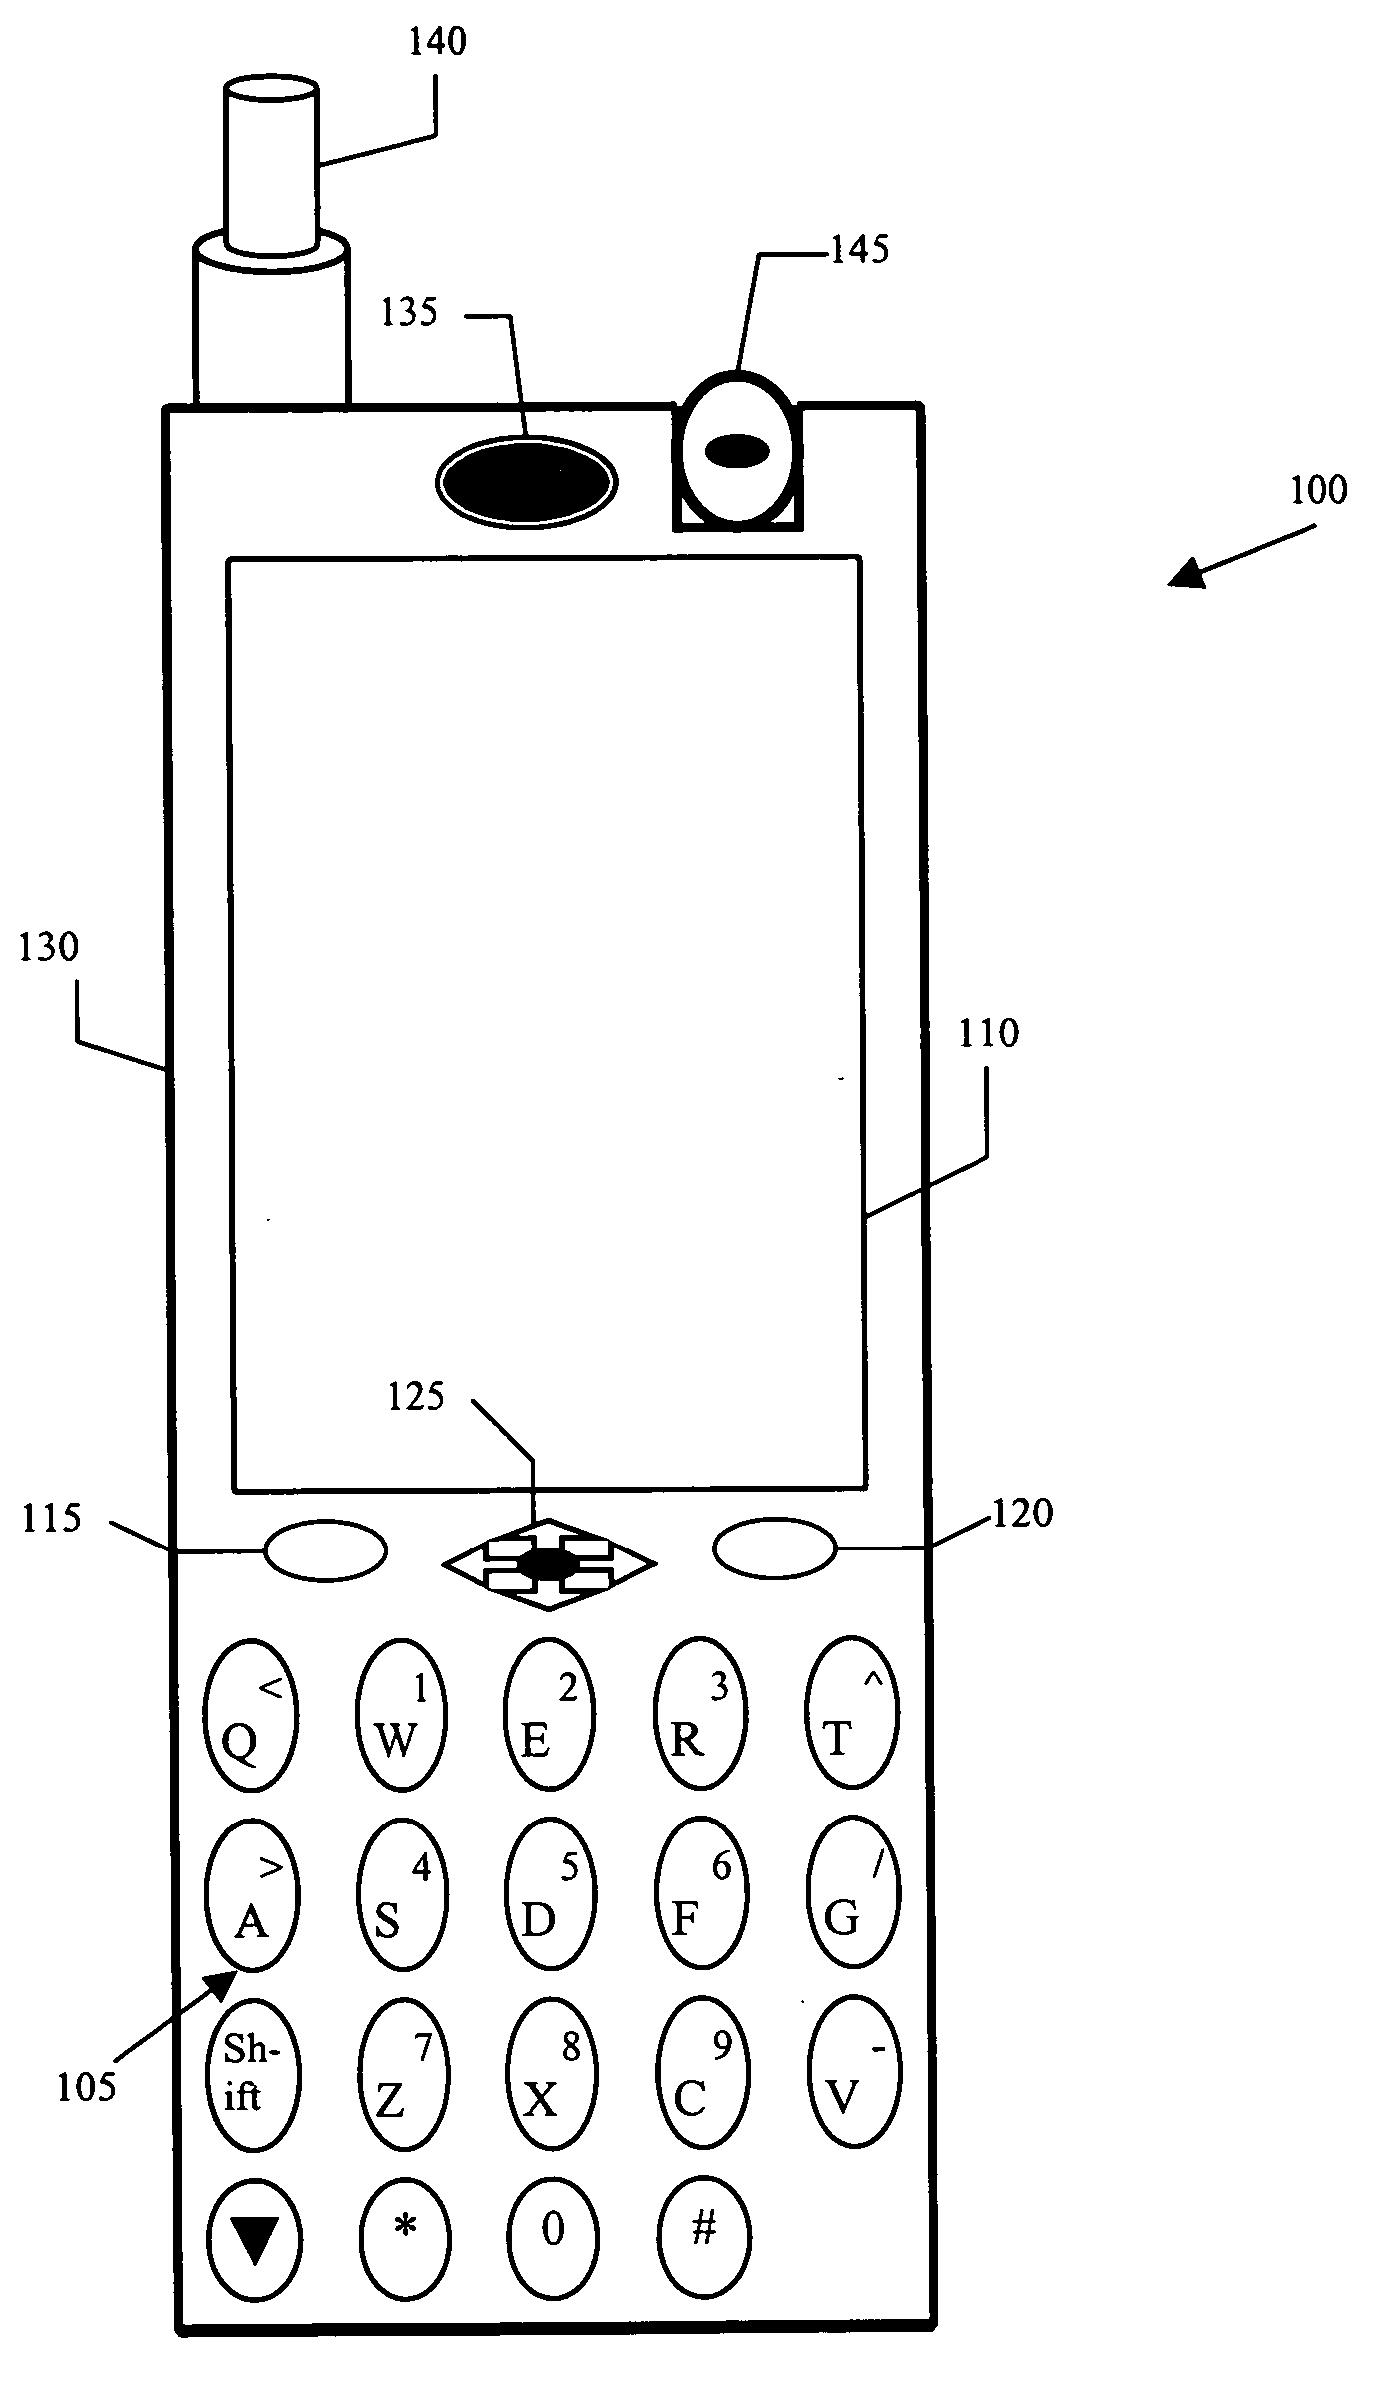 Full qwerty web-phone with optional second keypad